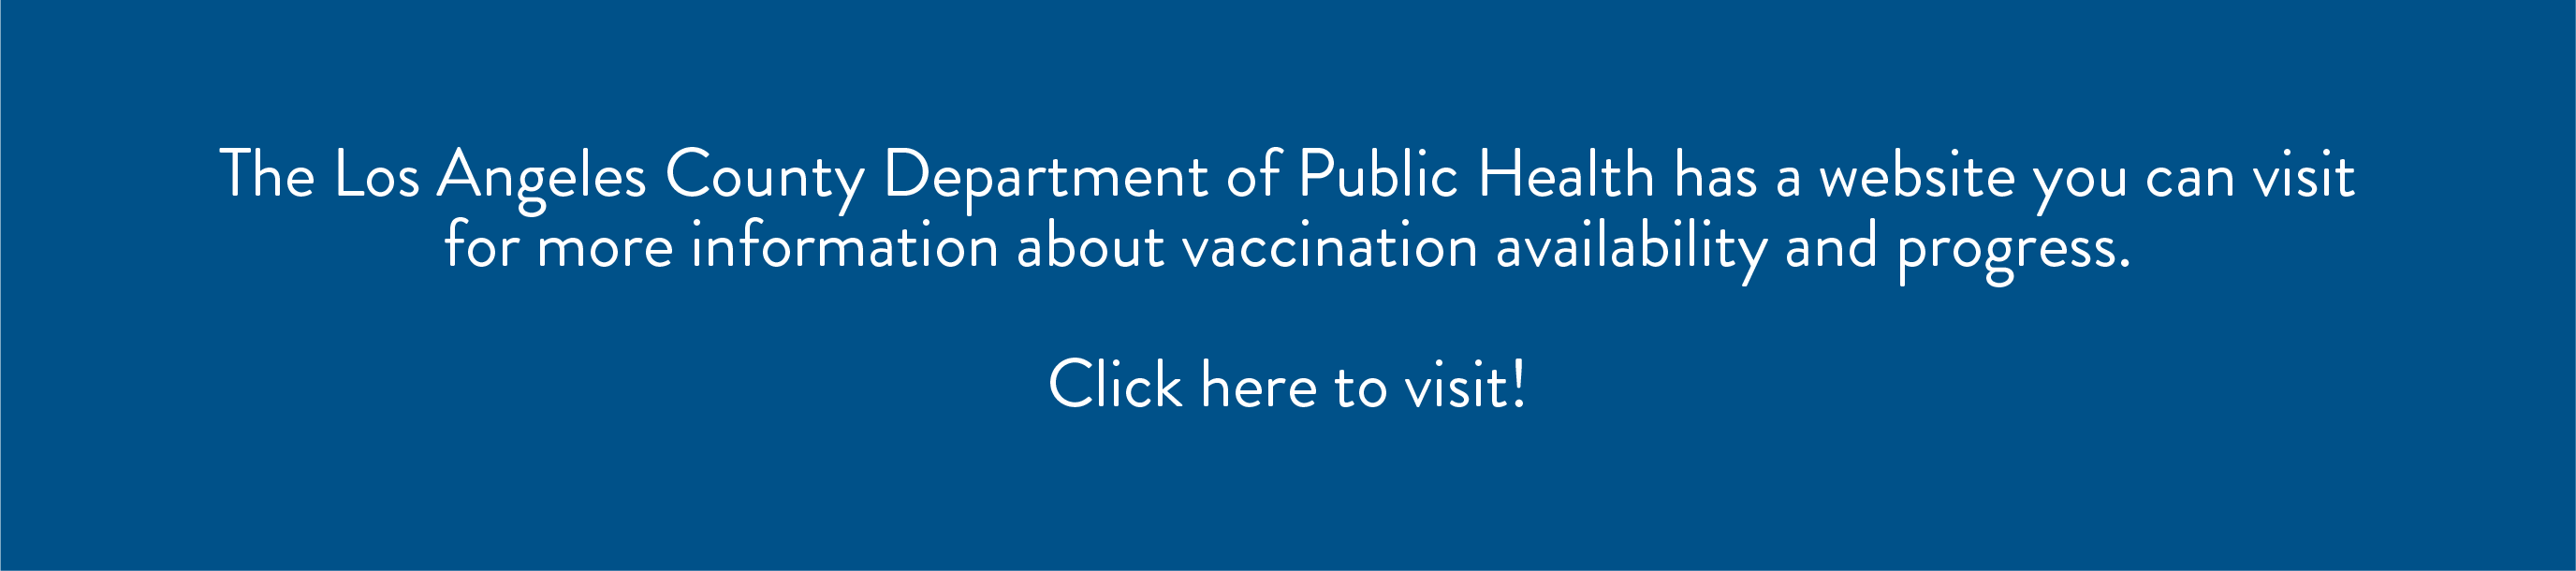 Los Angeles County Department of Public Health has a website you can visit for more information about vaccination availability and progress. Click here to visit